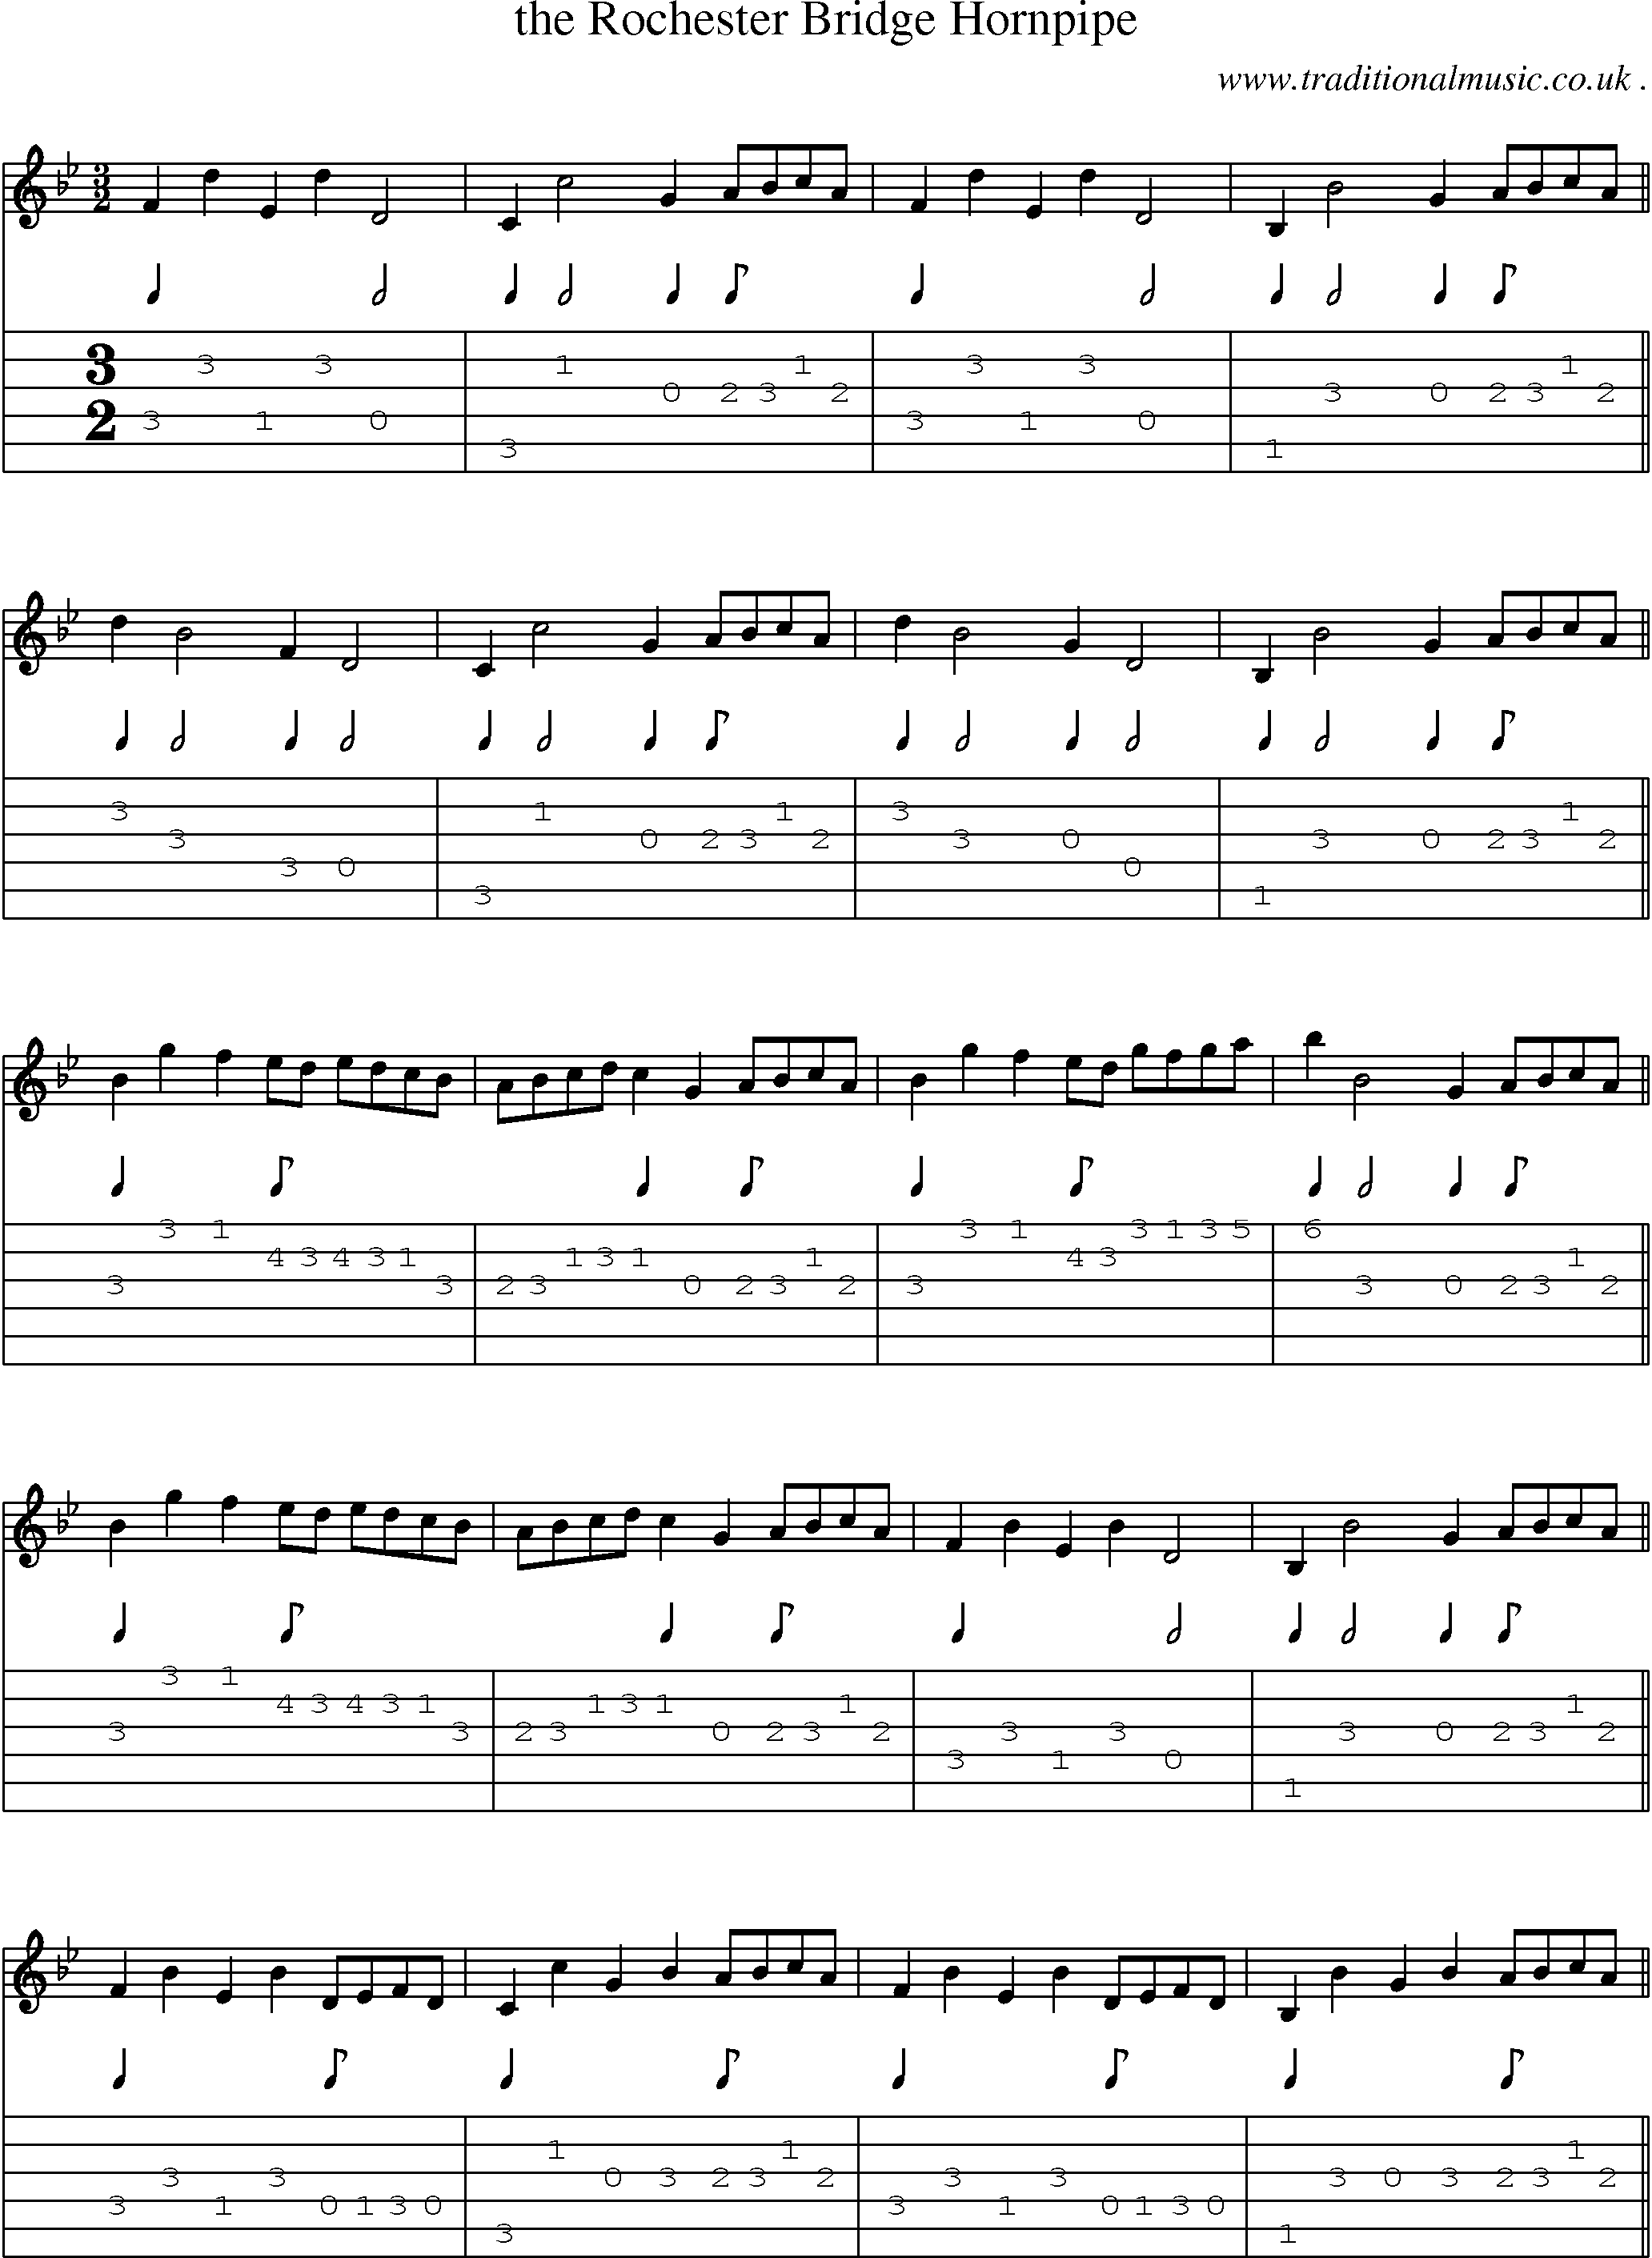 Sheet-Music and Guitar Tabs for The Rochester Bridge Hornpipe